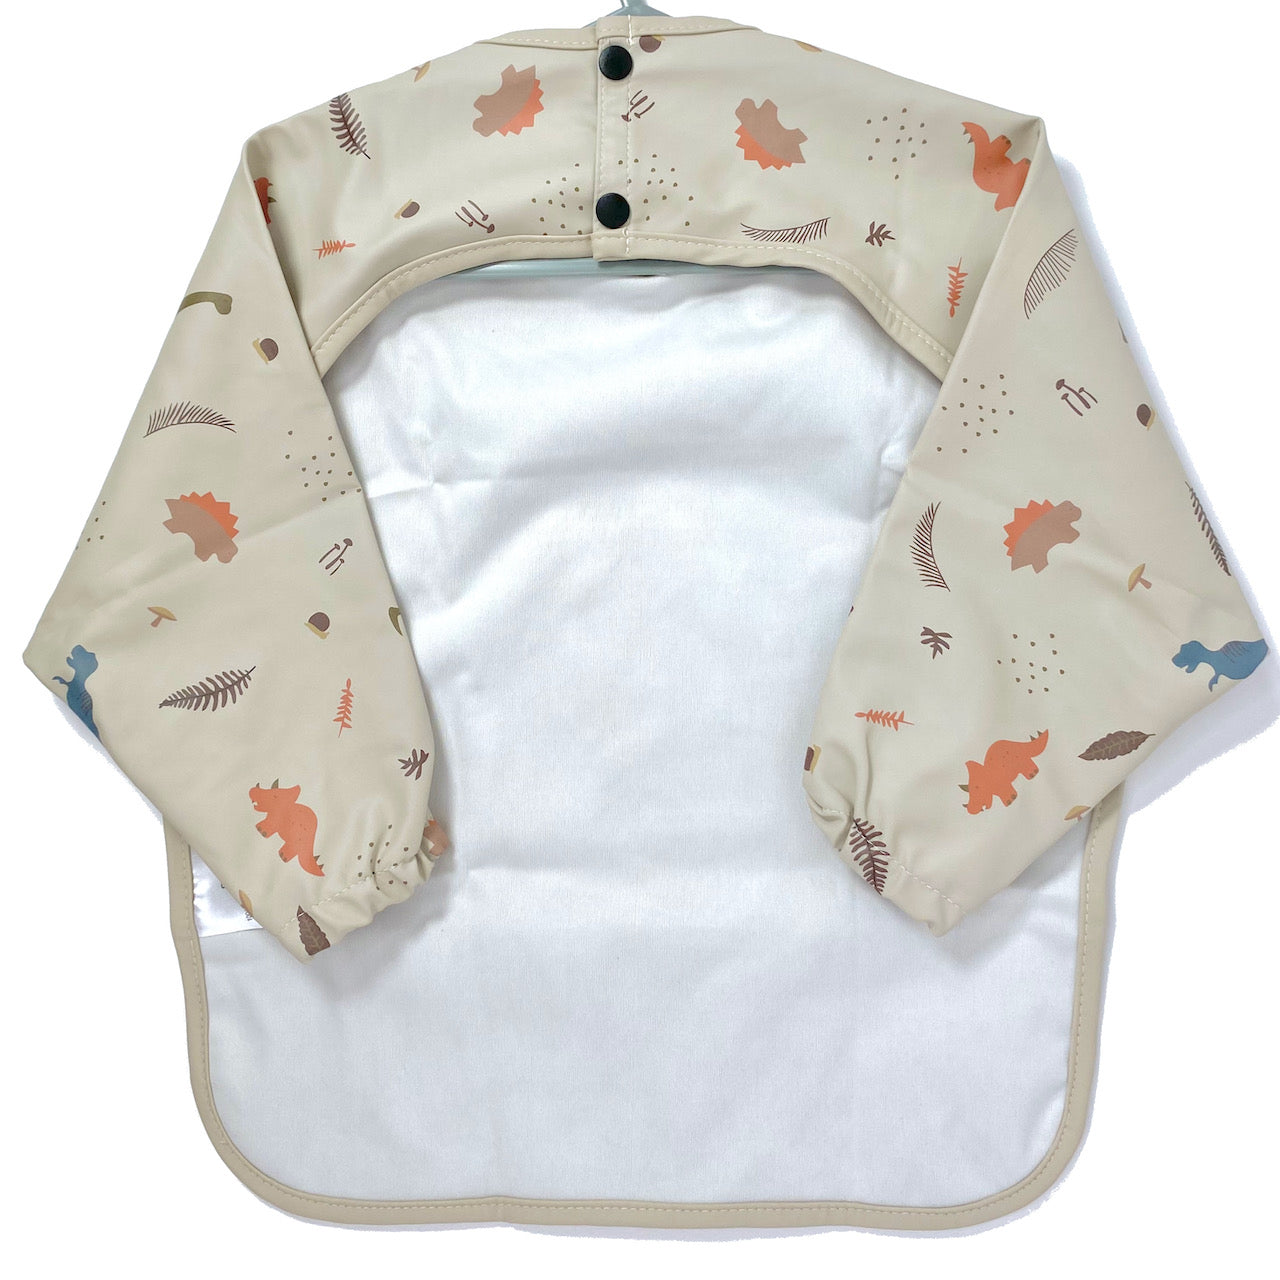 Long-sleeve kids apron in a beige and dinosaur design, showing back view.